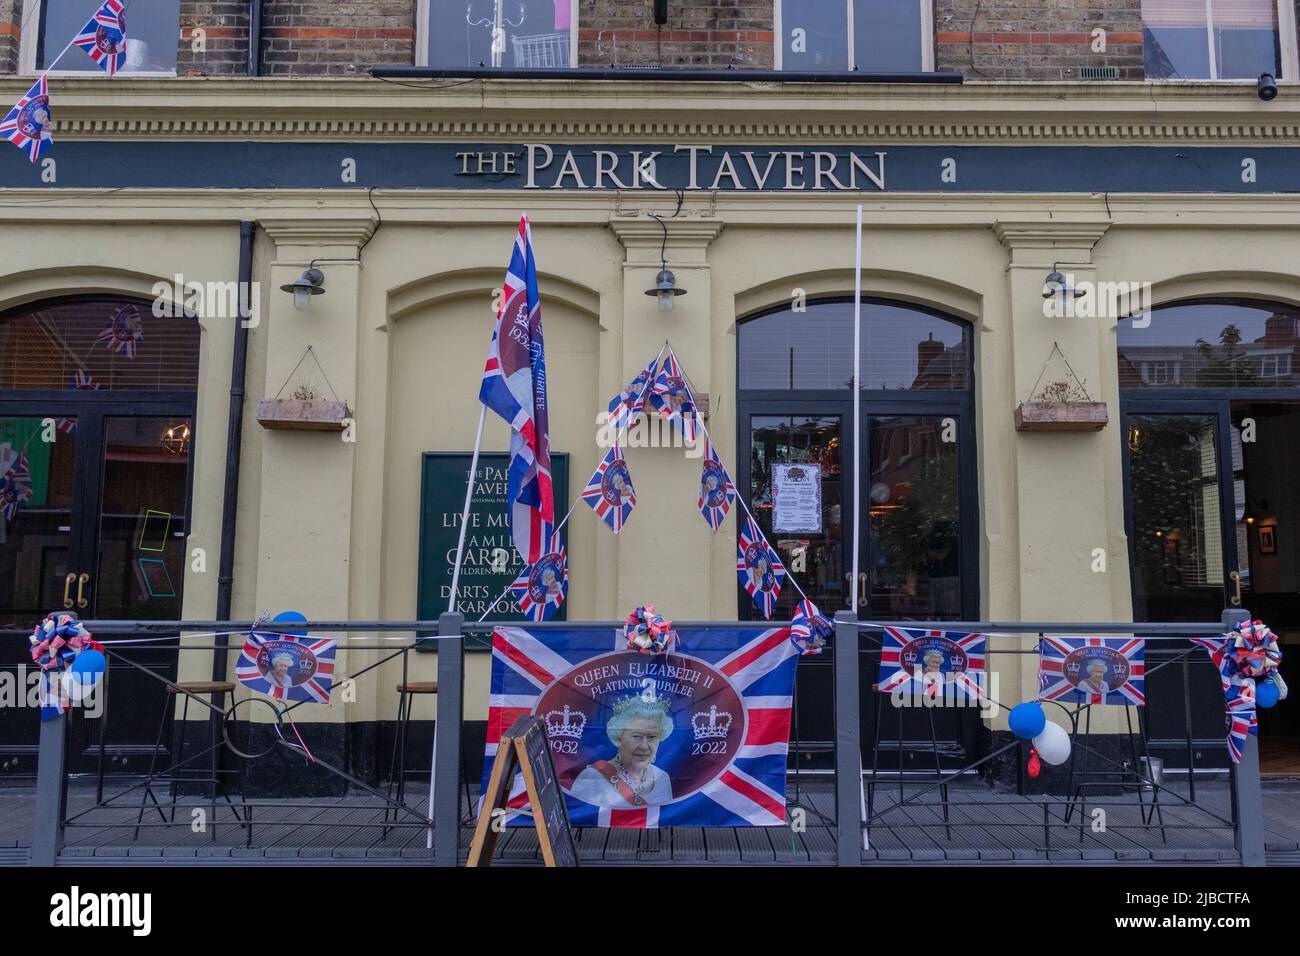 Southend on sea, UK. 5th Jun, 2022. Decorations outside a pub, The Park Tavern, on the last day of the Queens Platinum Jubilee celebrations. Penelope Barritt/Alamy Live News Stock Photo